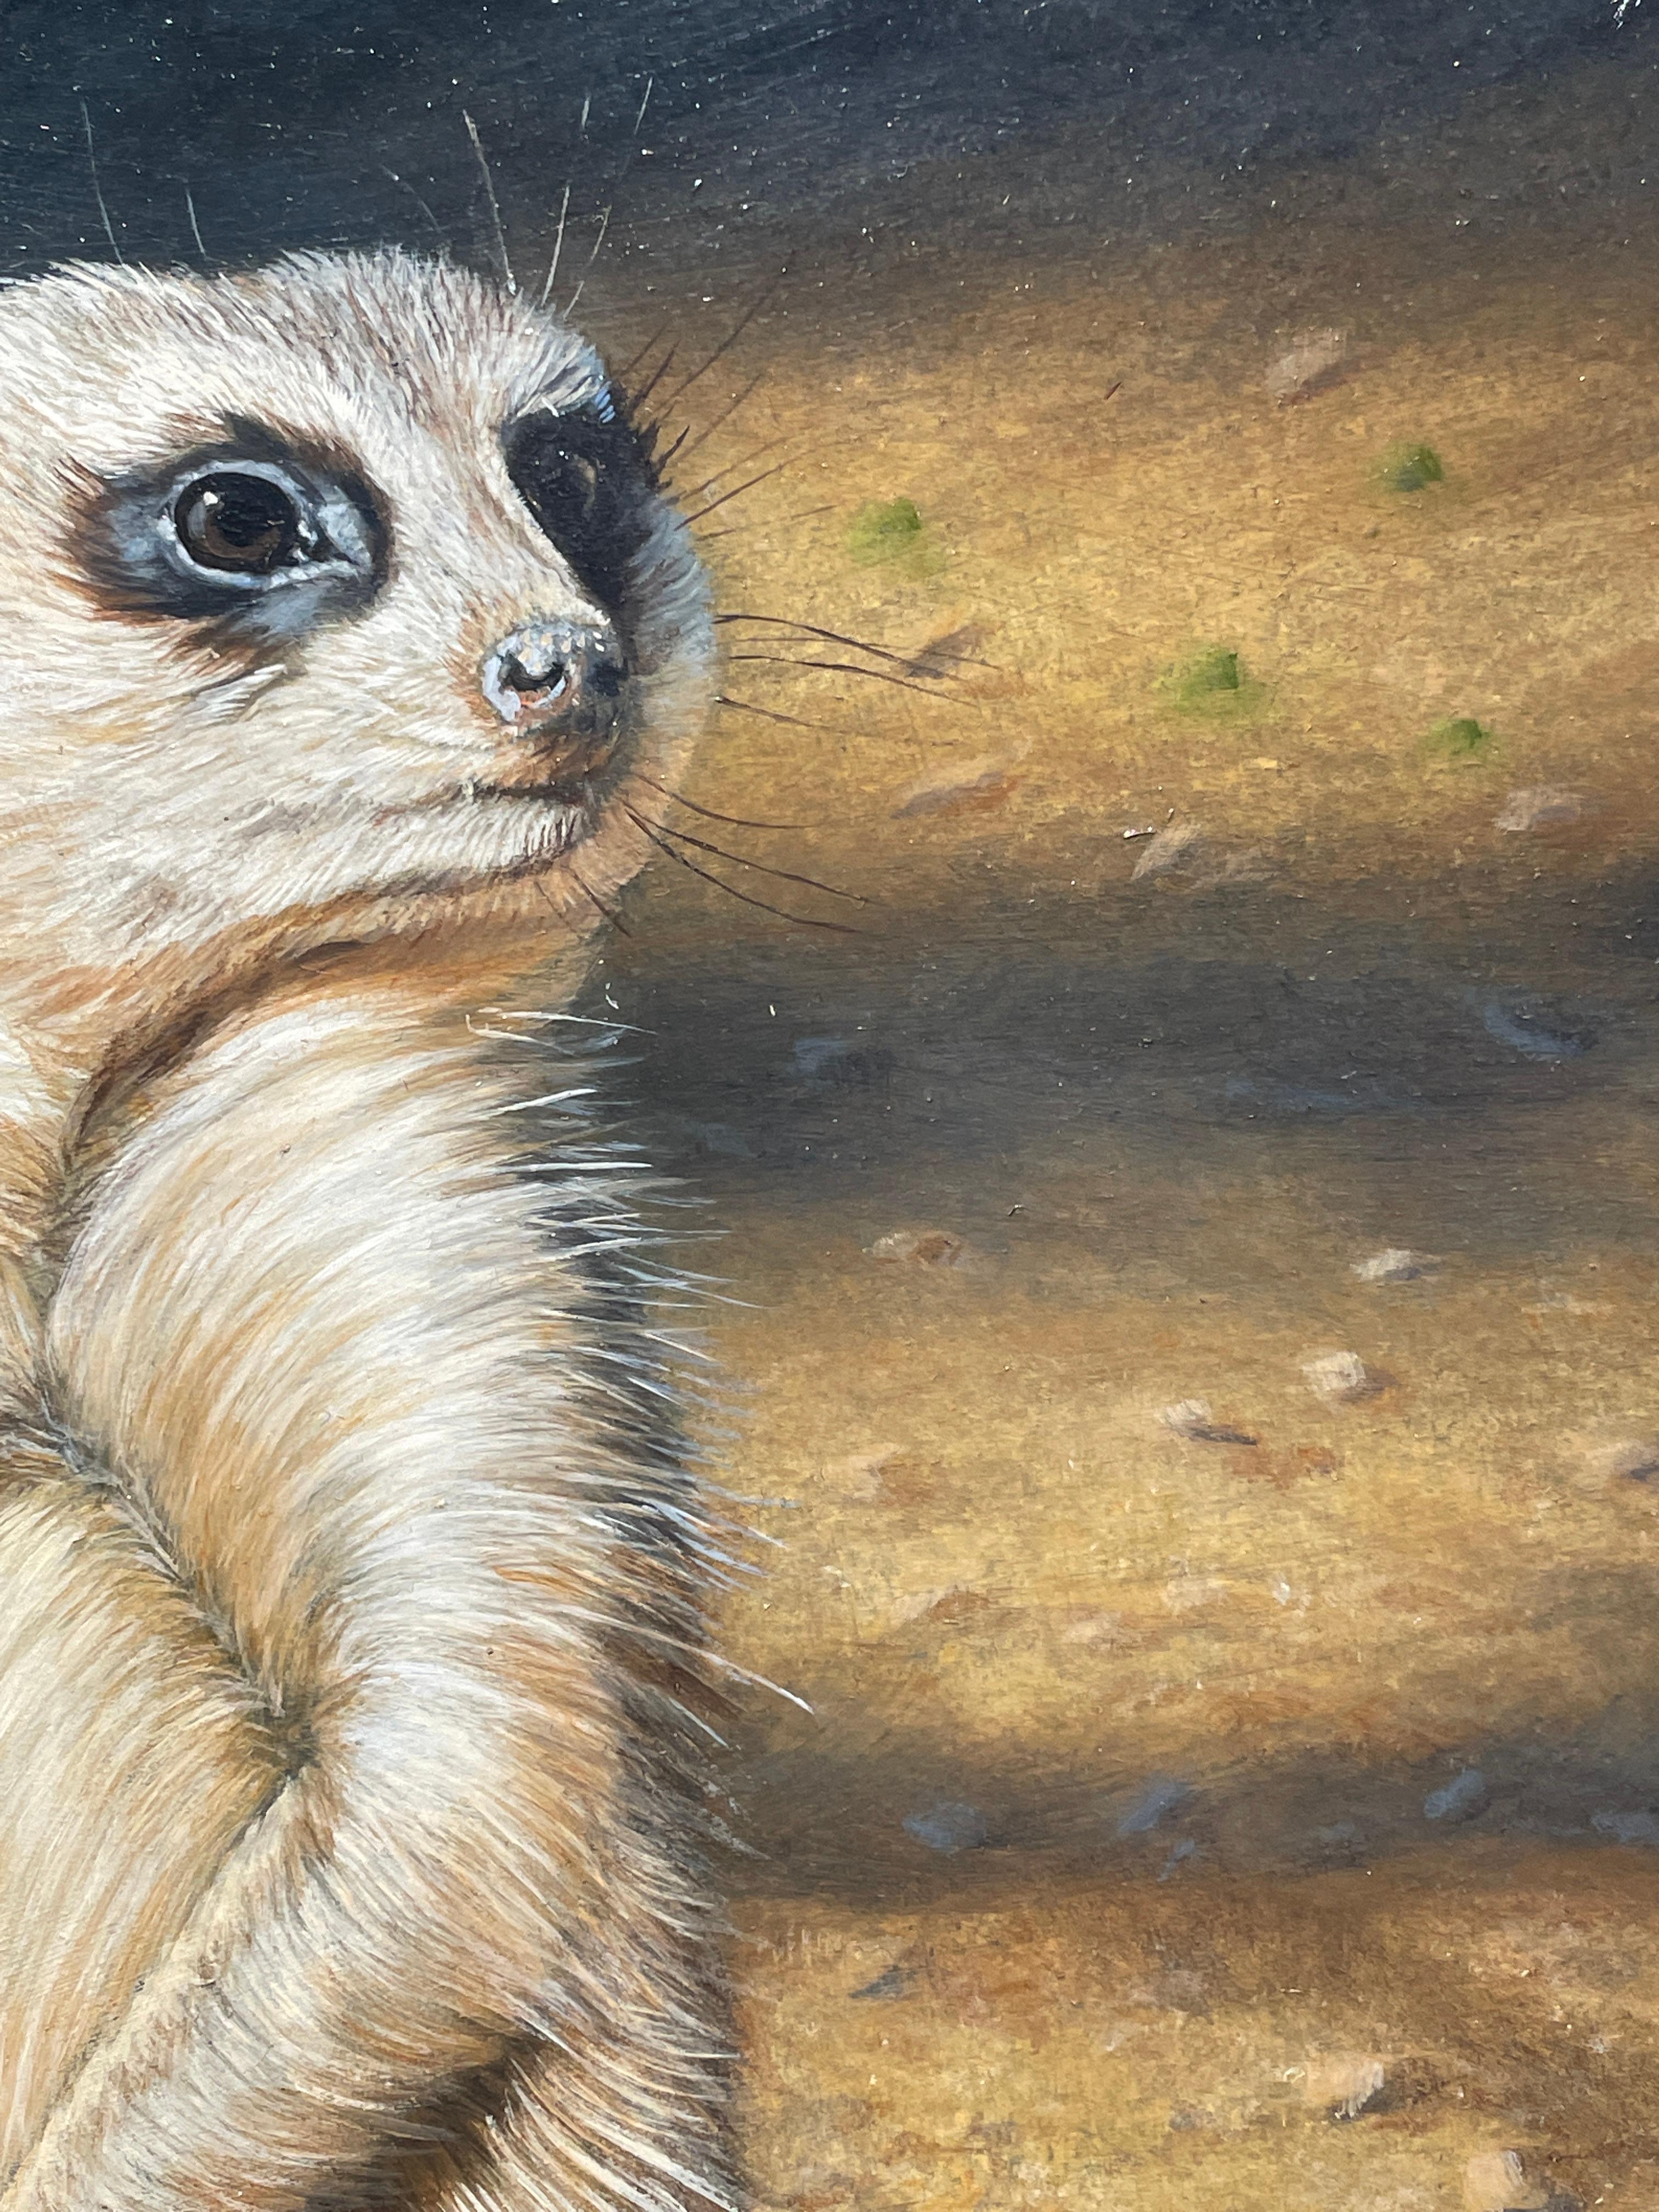 'The Sun Worshipper' Contemporary photorealist painting of a Meerkat in the wild - Photorealist Painting by Ben Waddams